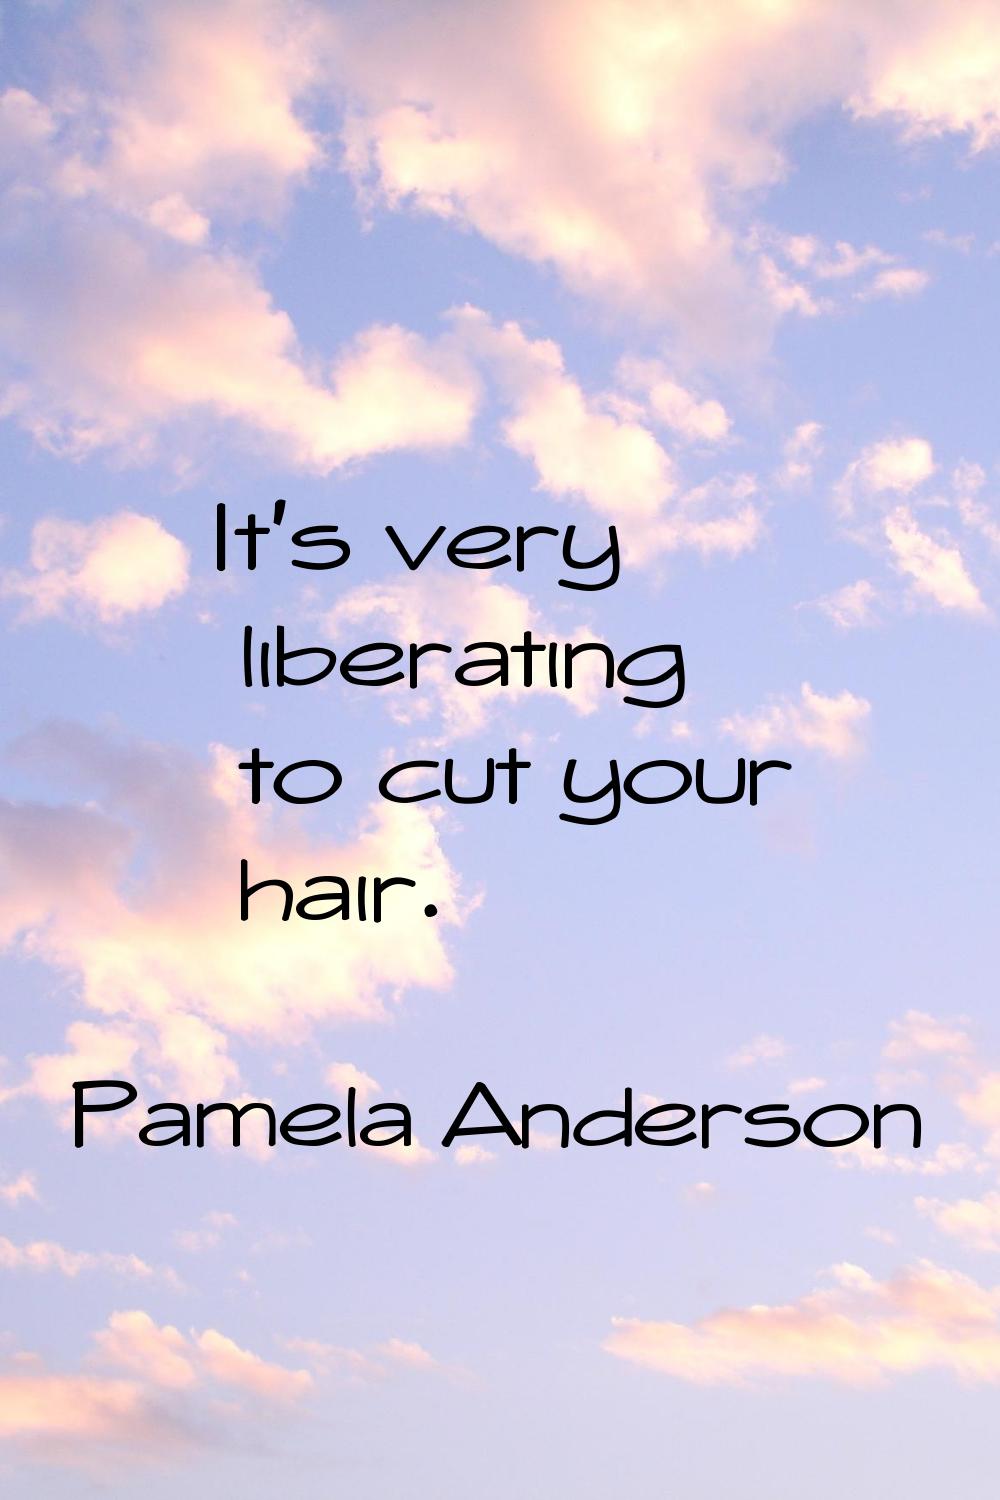 It's very liberating to cut your hair.